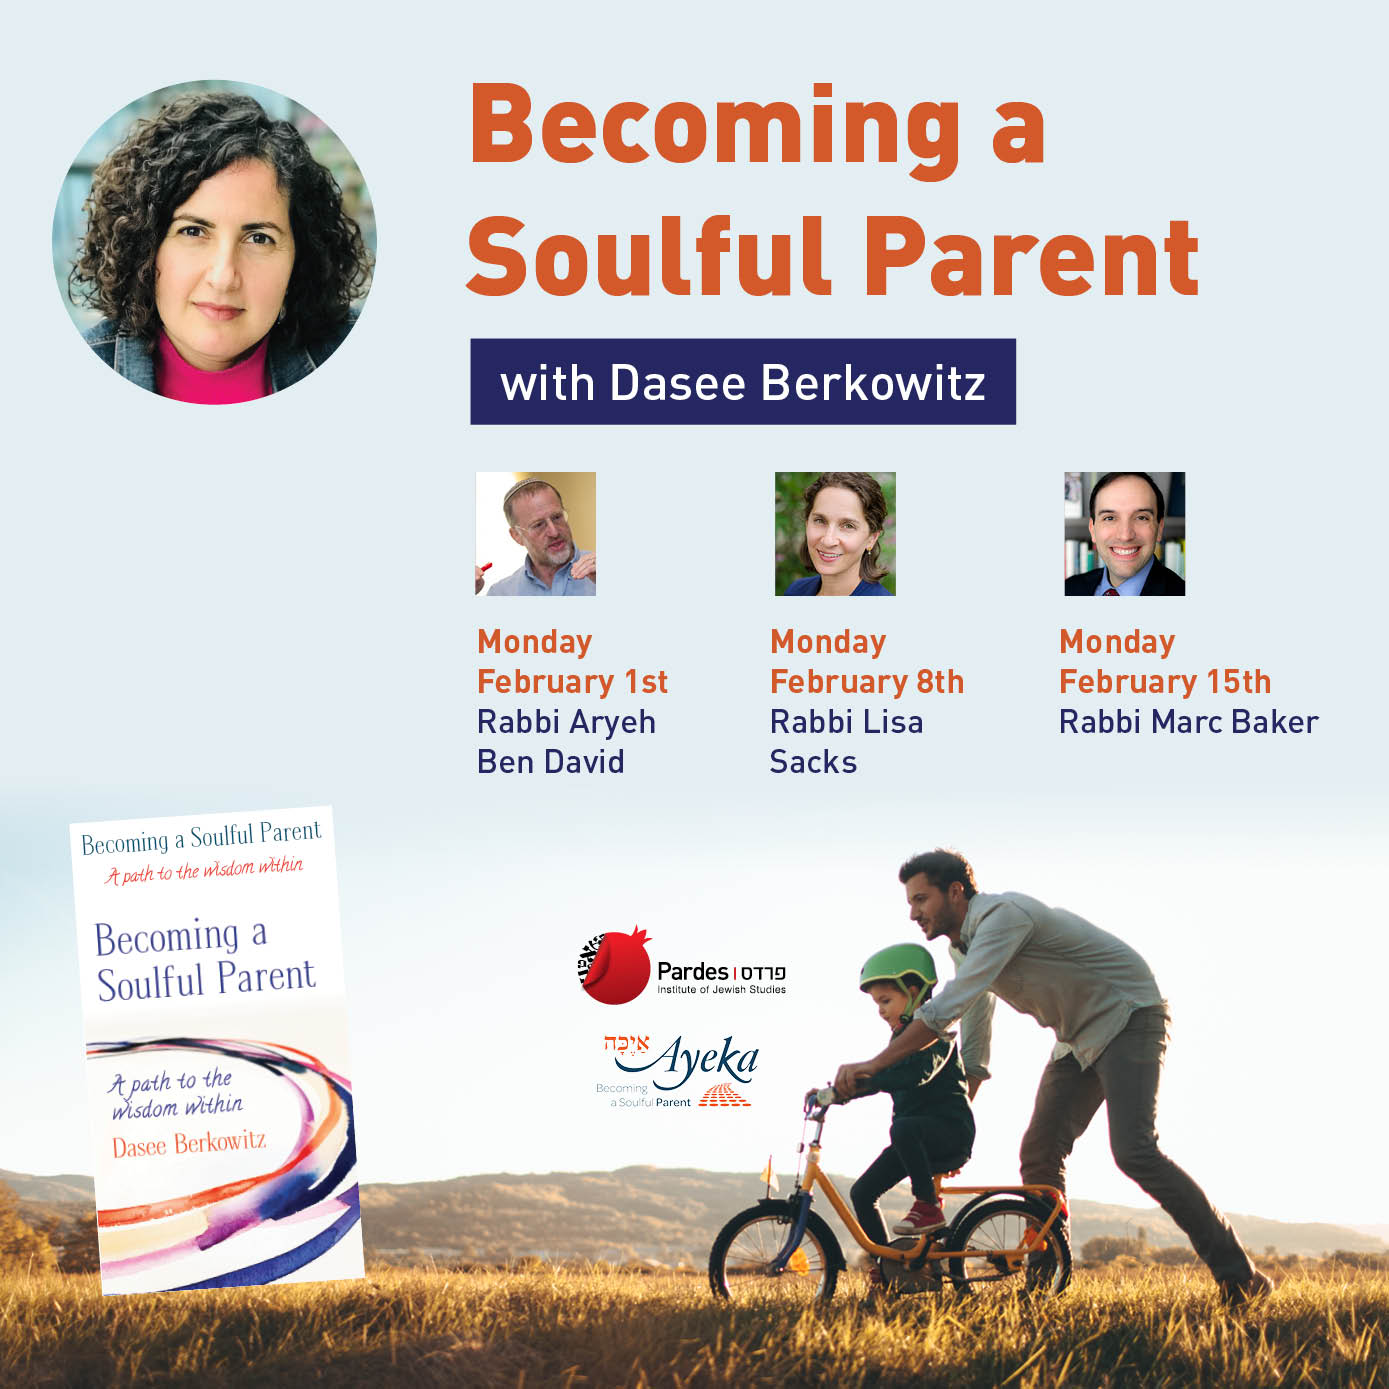 Becoming a Soulful Parent